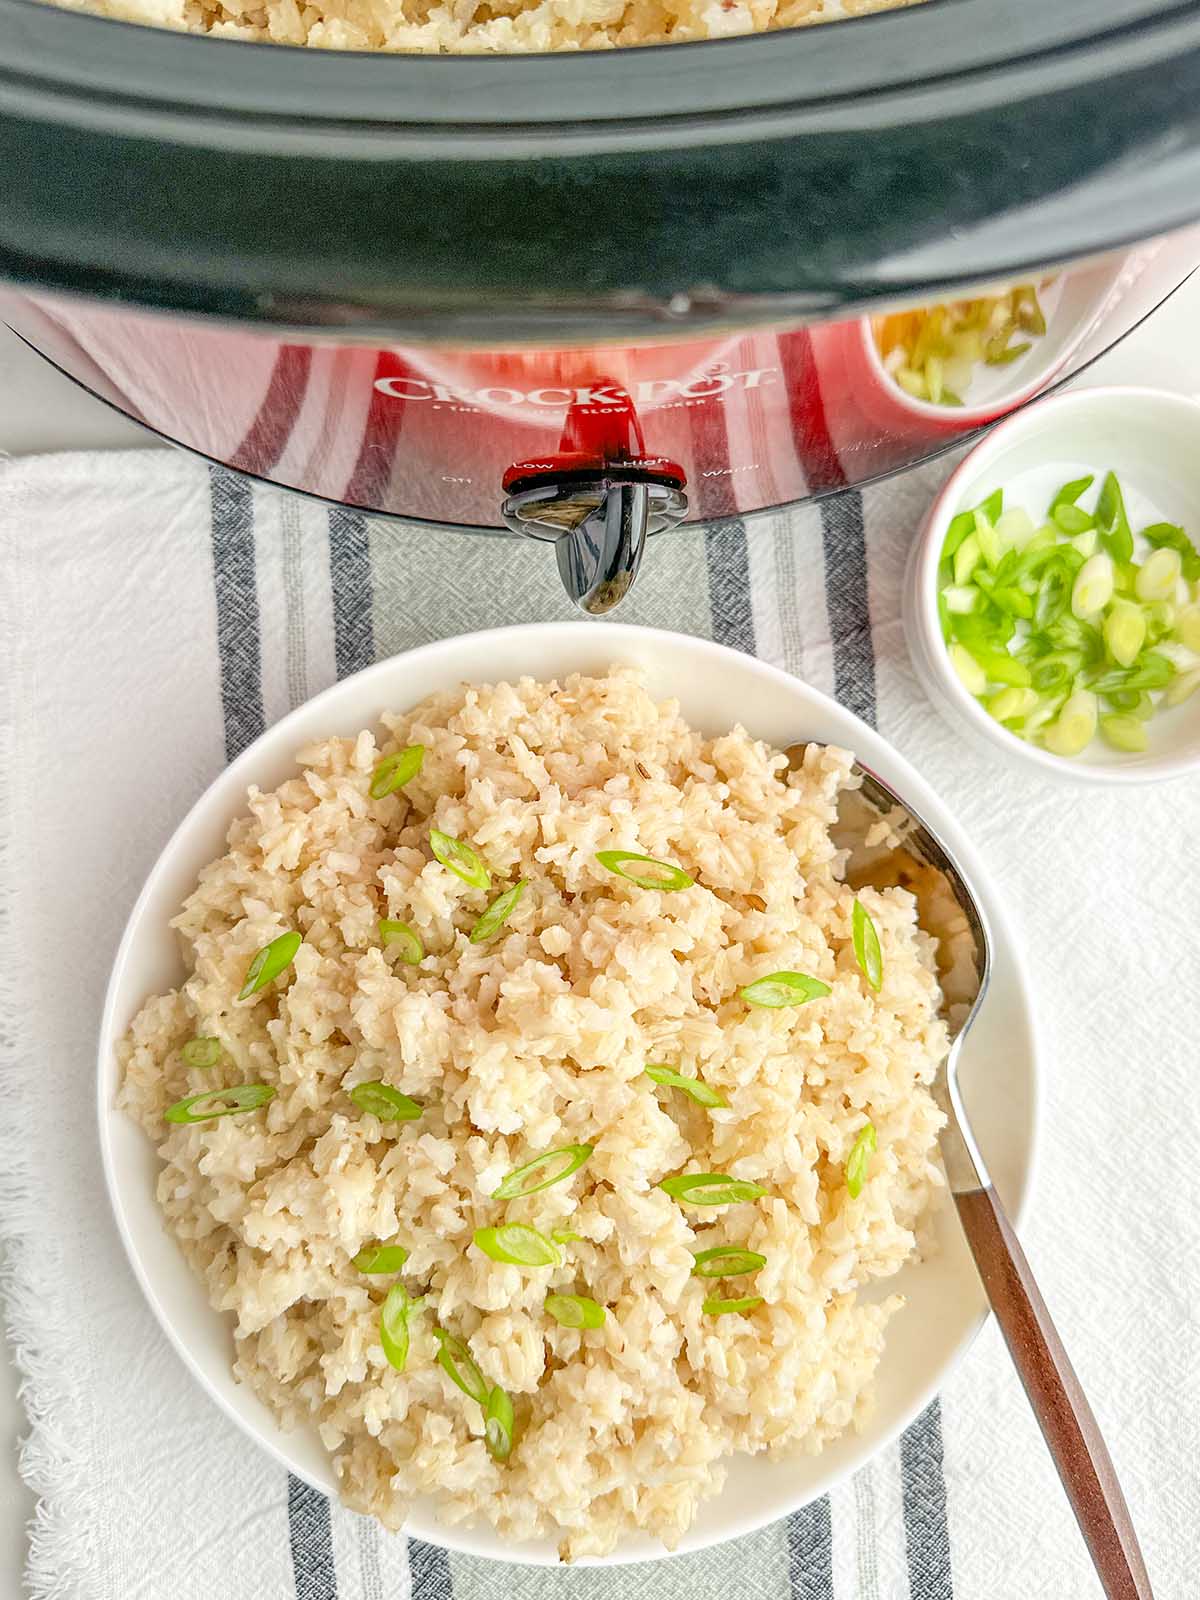 cooked brown rice and green onions in a white bowl by a red crock pot.